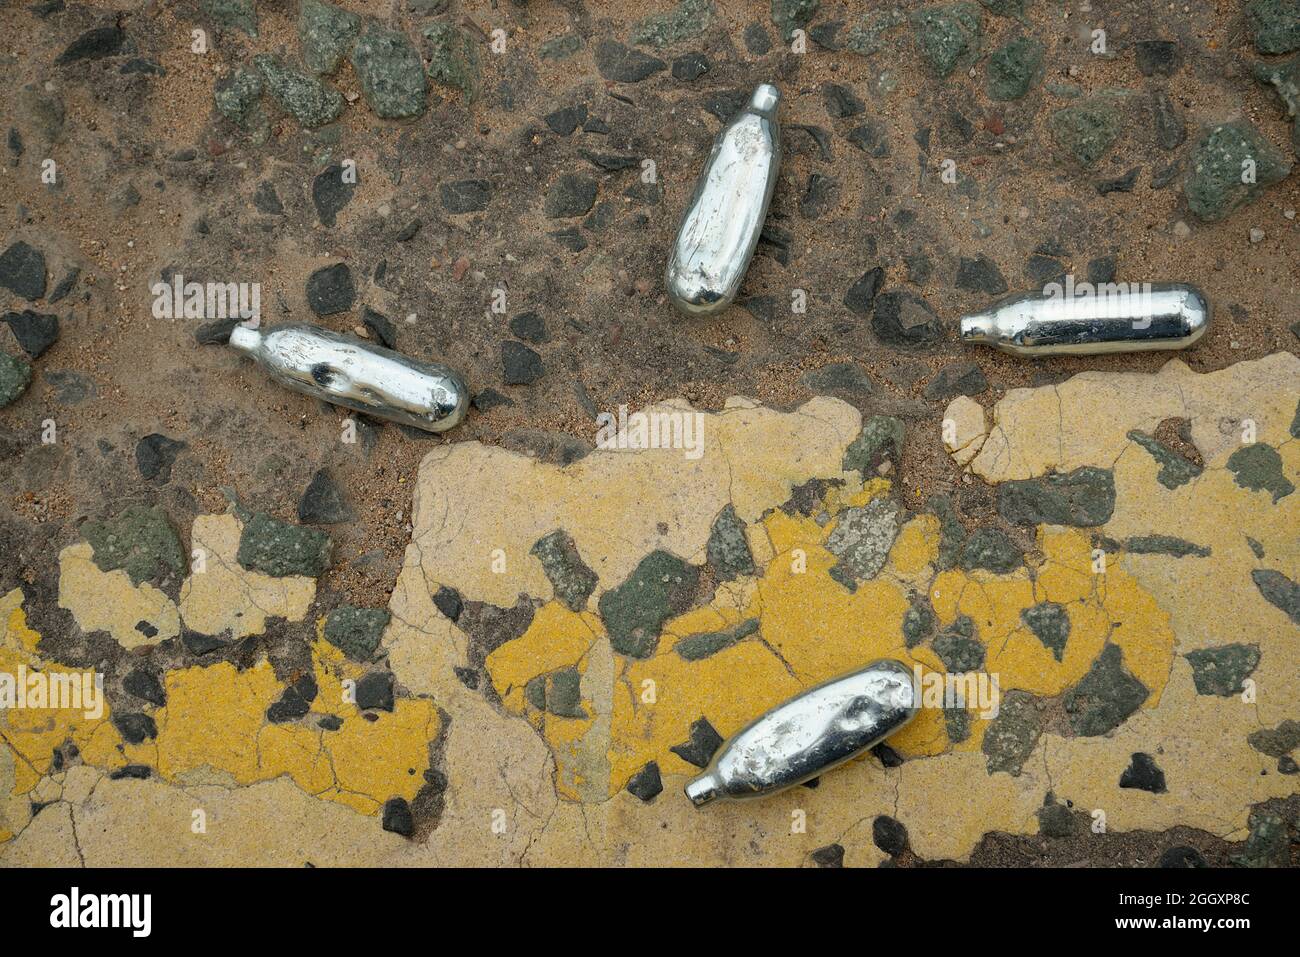 Nitrous Oxide gas canisters discarded on a street corner. Small silver gas cartridges used to fill balloons. Stock Photo